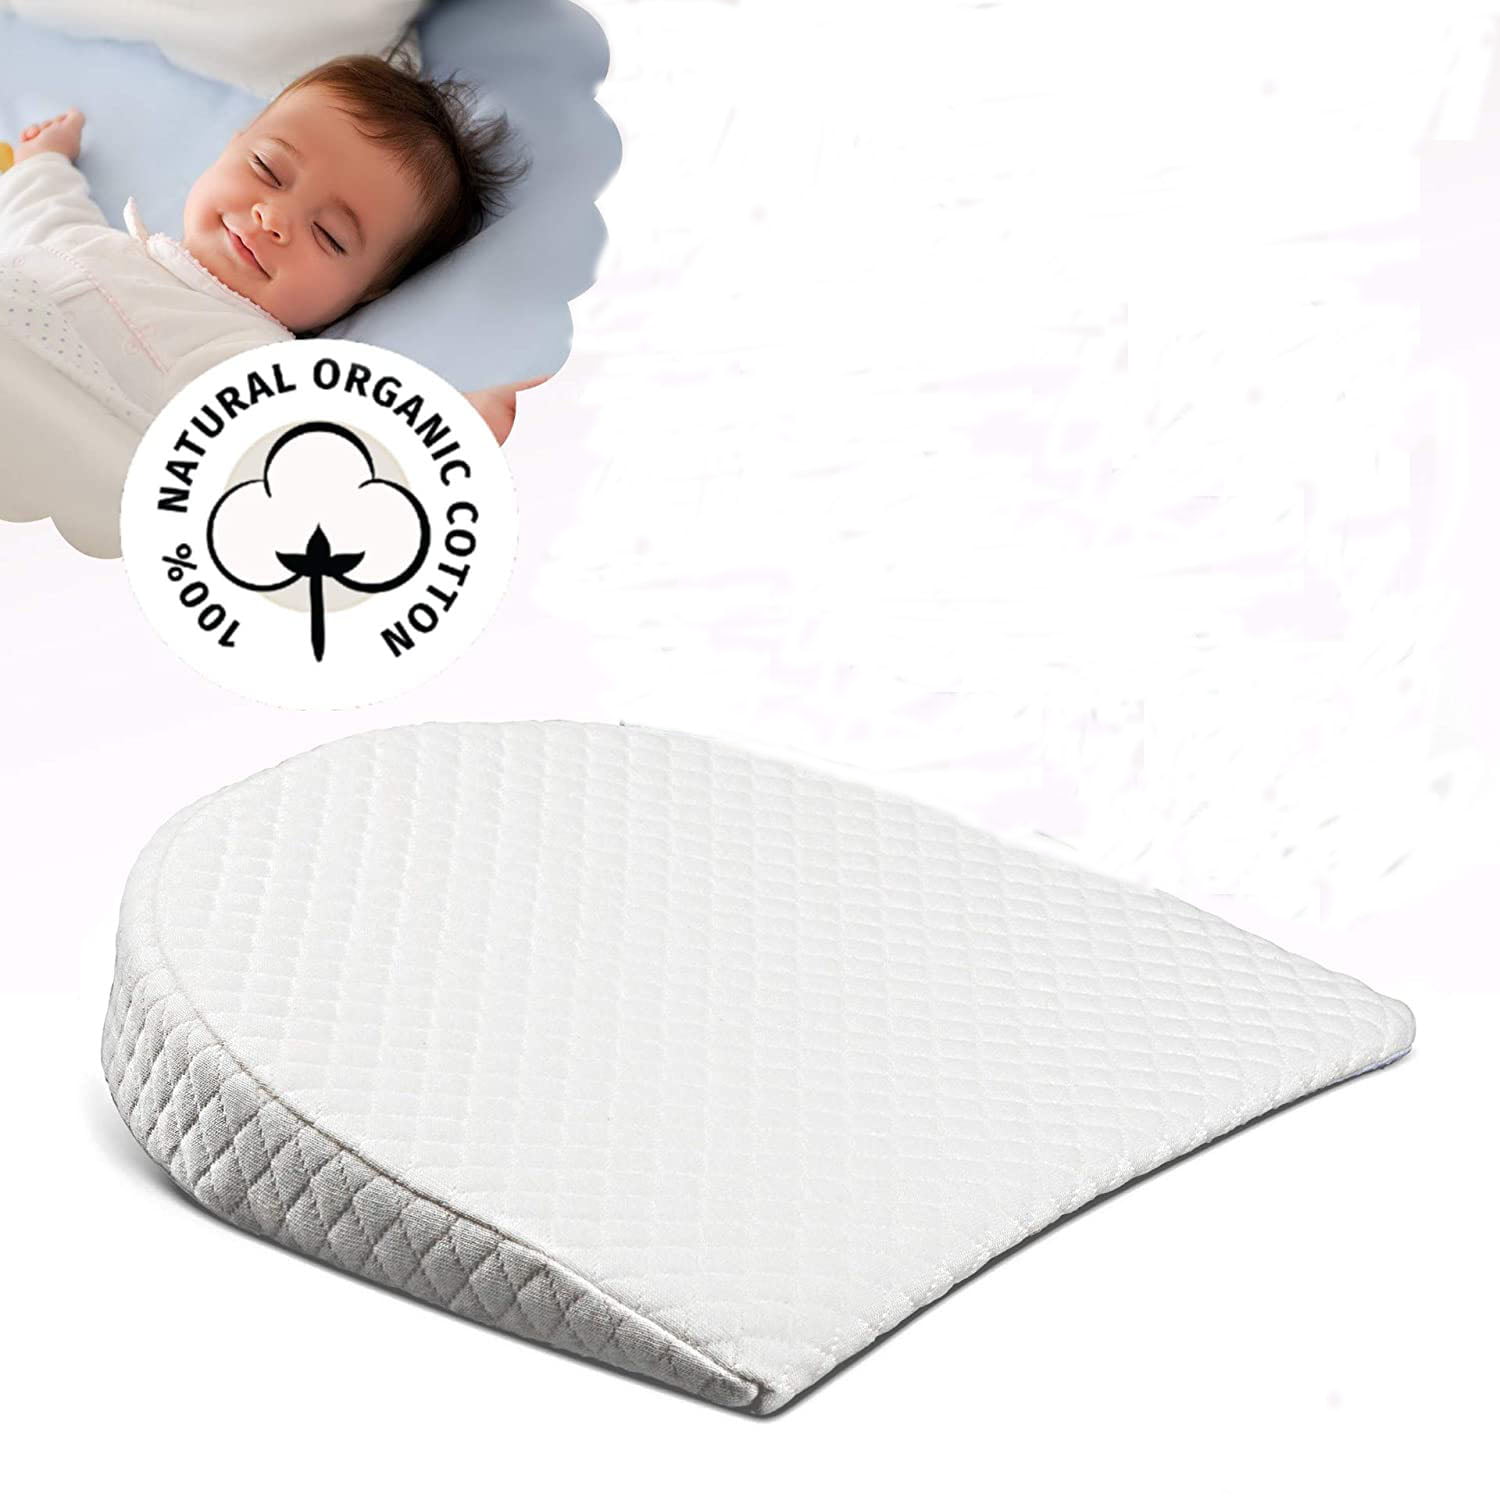 reflux wedge pillow baby